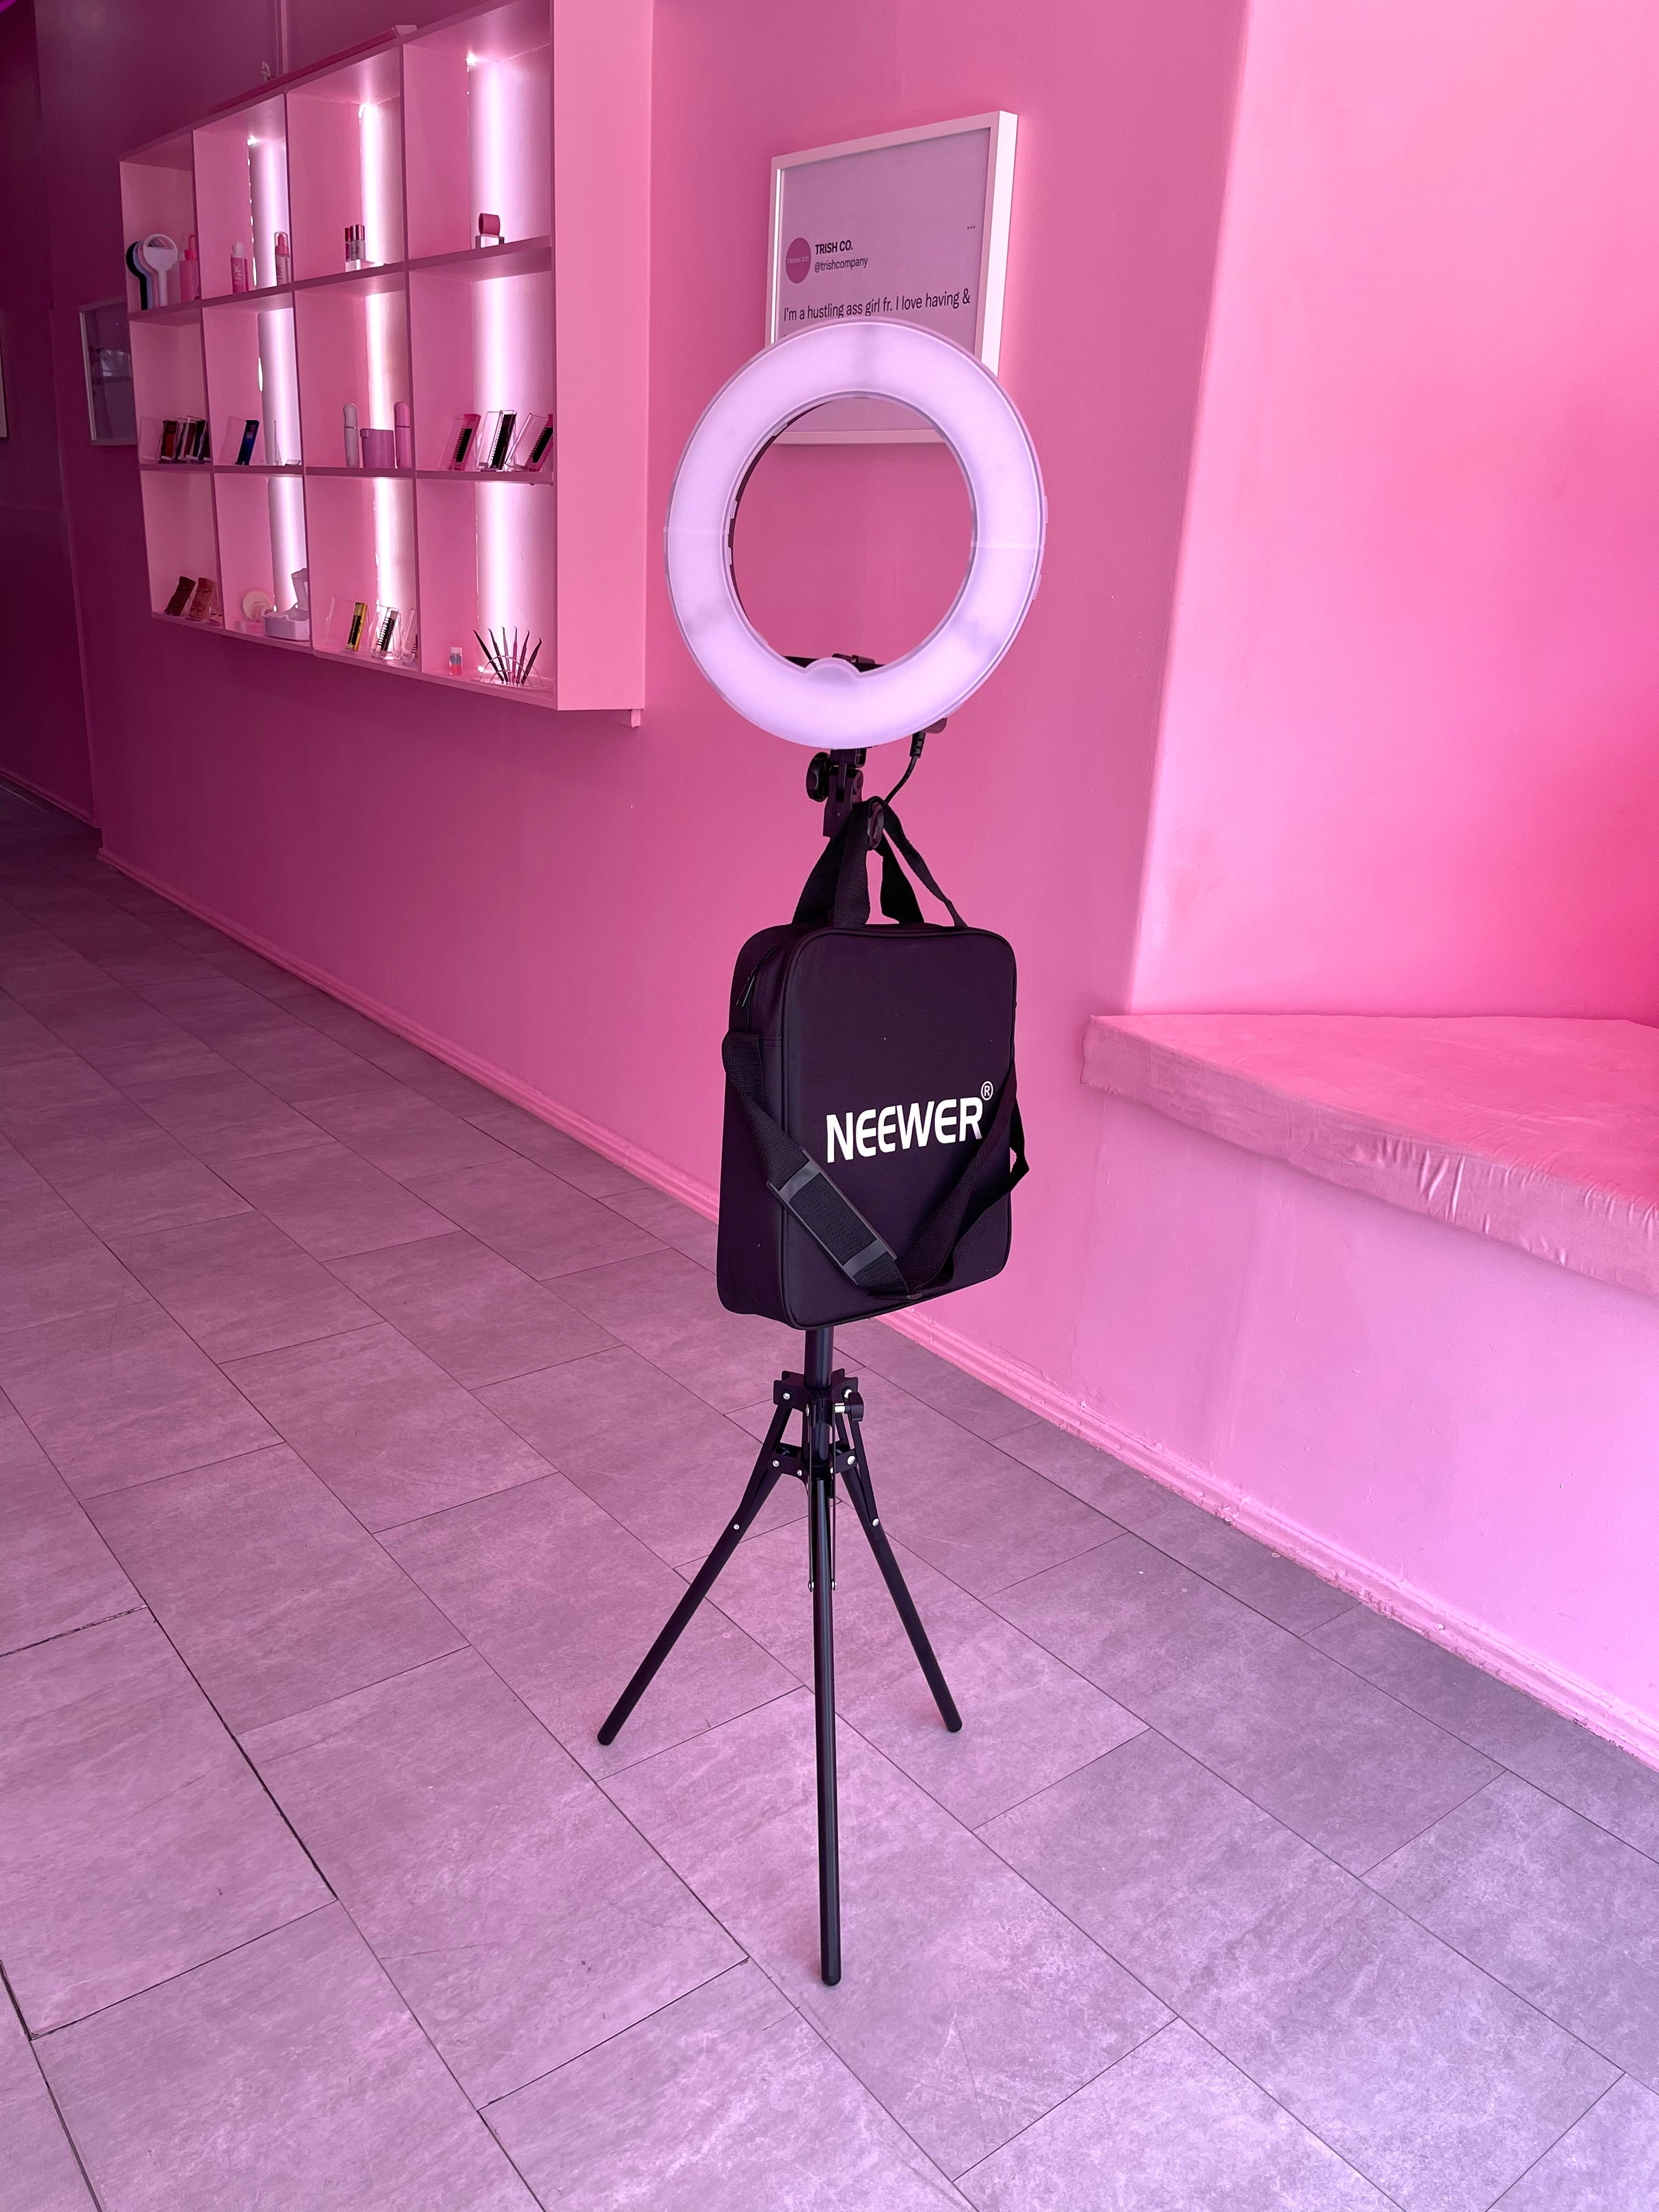 Neewer 14in ring light IN STORE ONLY